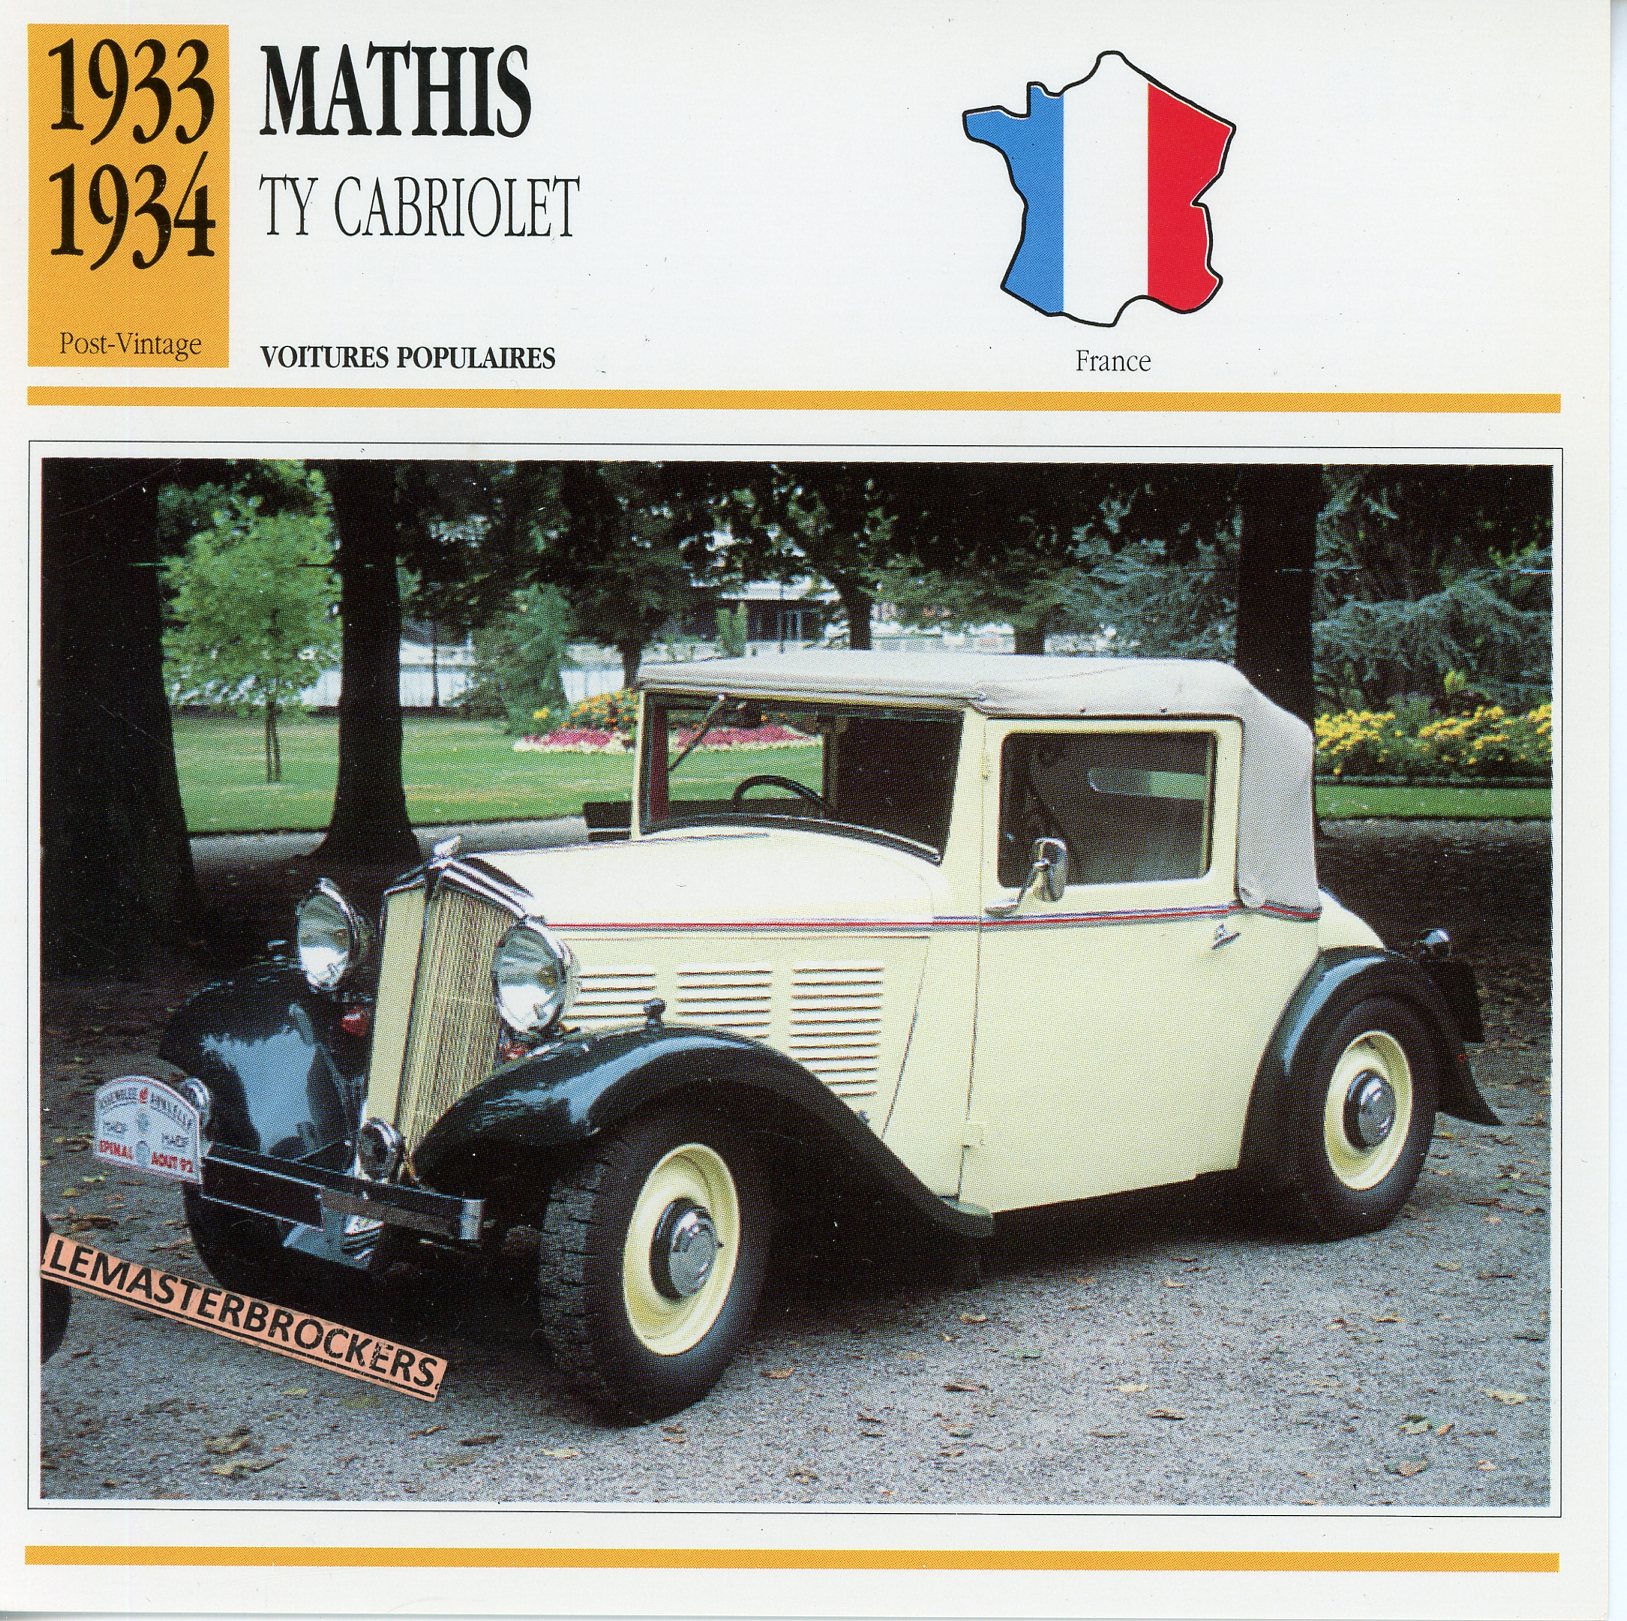 MATHIS-TY-CABRIOLET-1933-1934-FICHE-AUTO-ATLAS-LEMASTERBROCKERS